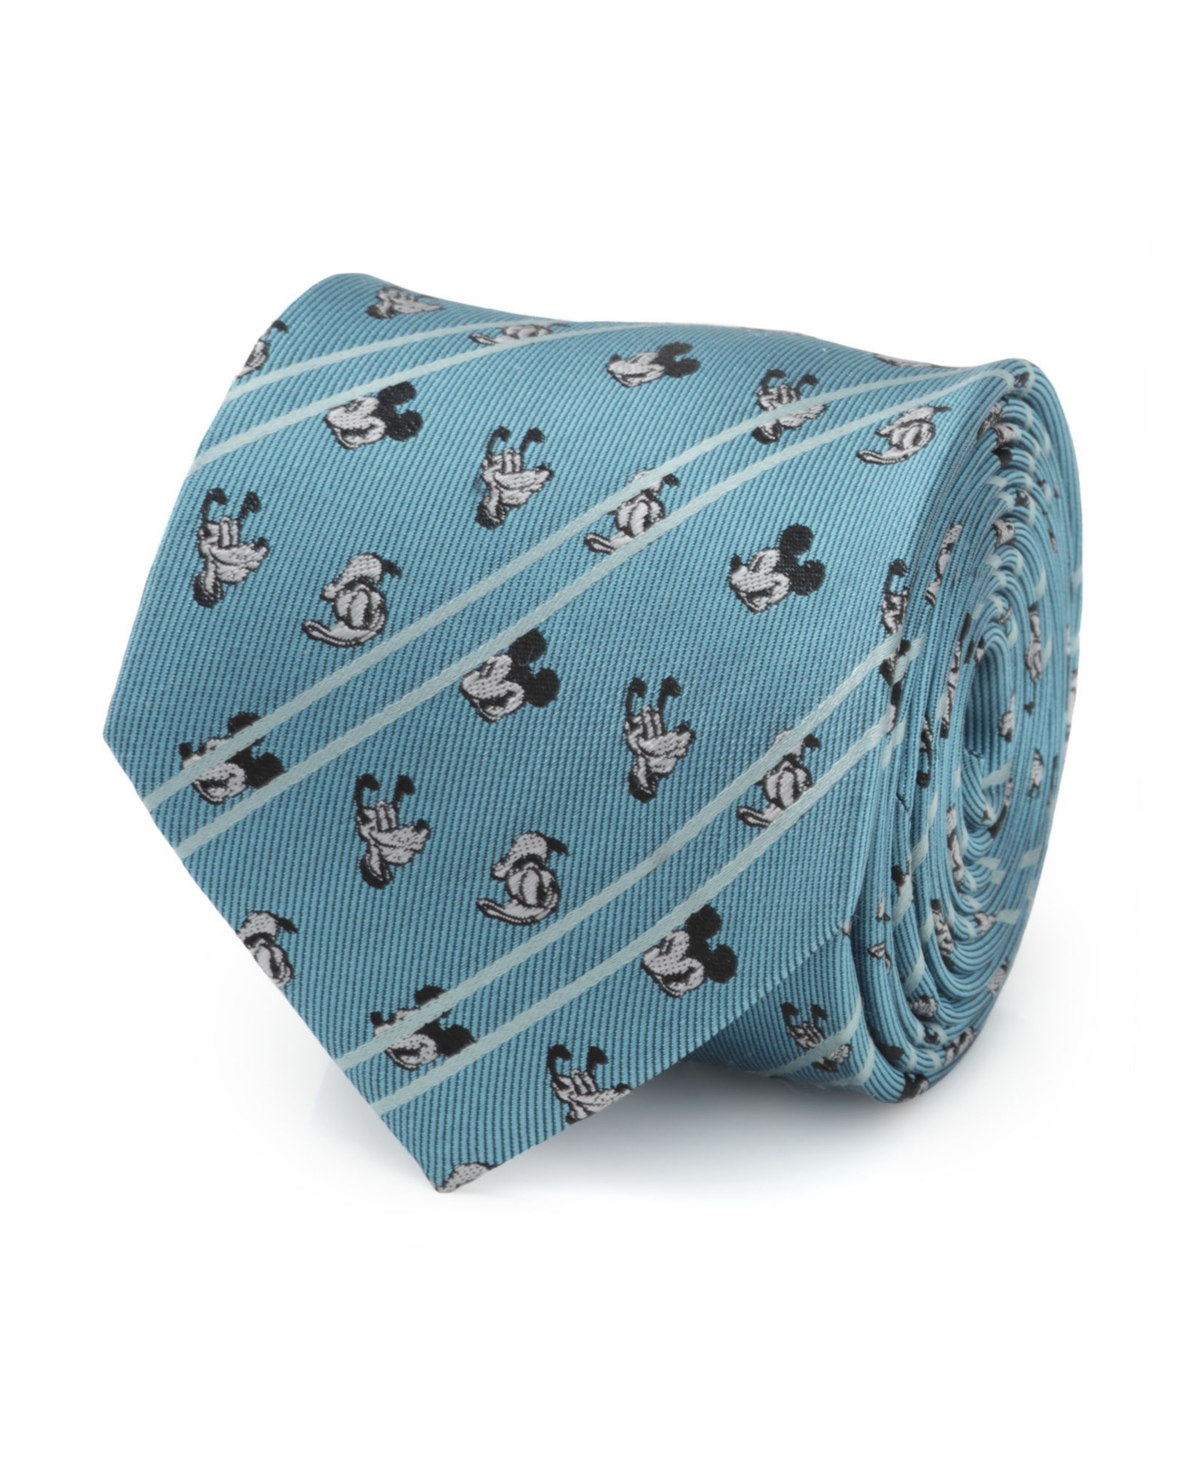 Men's Mickey and Friends Striped Tie - Blue